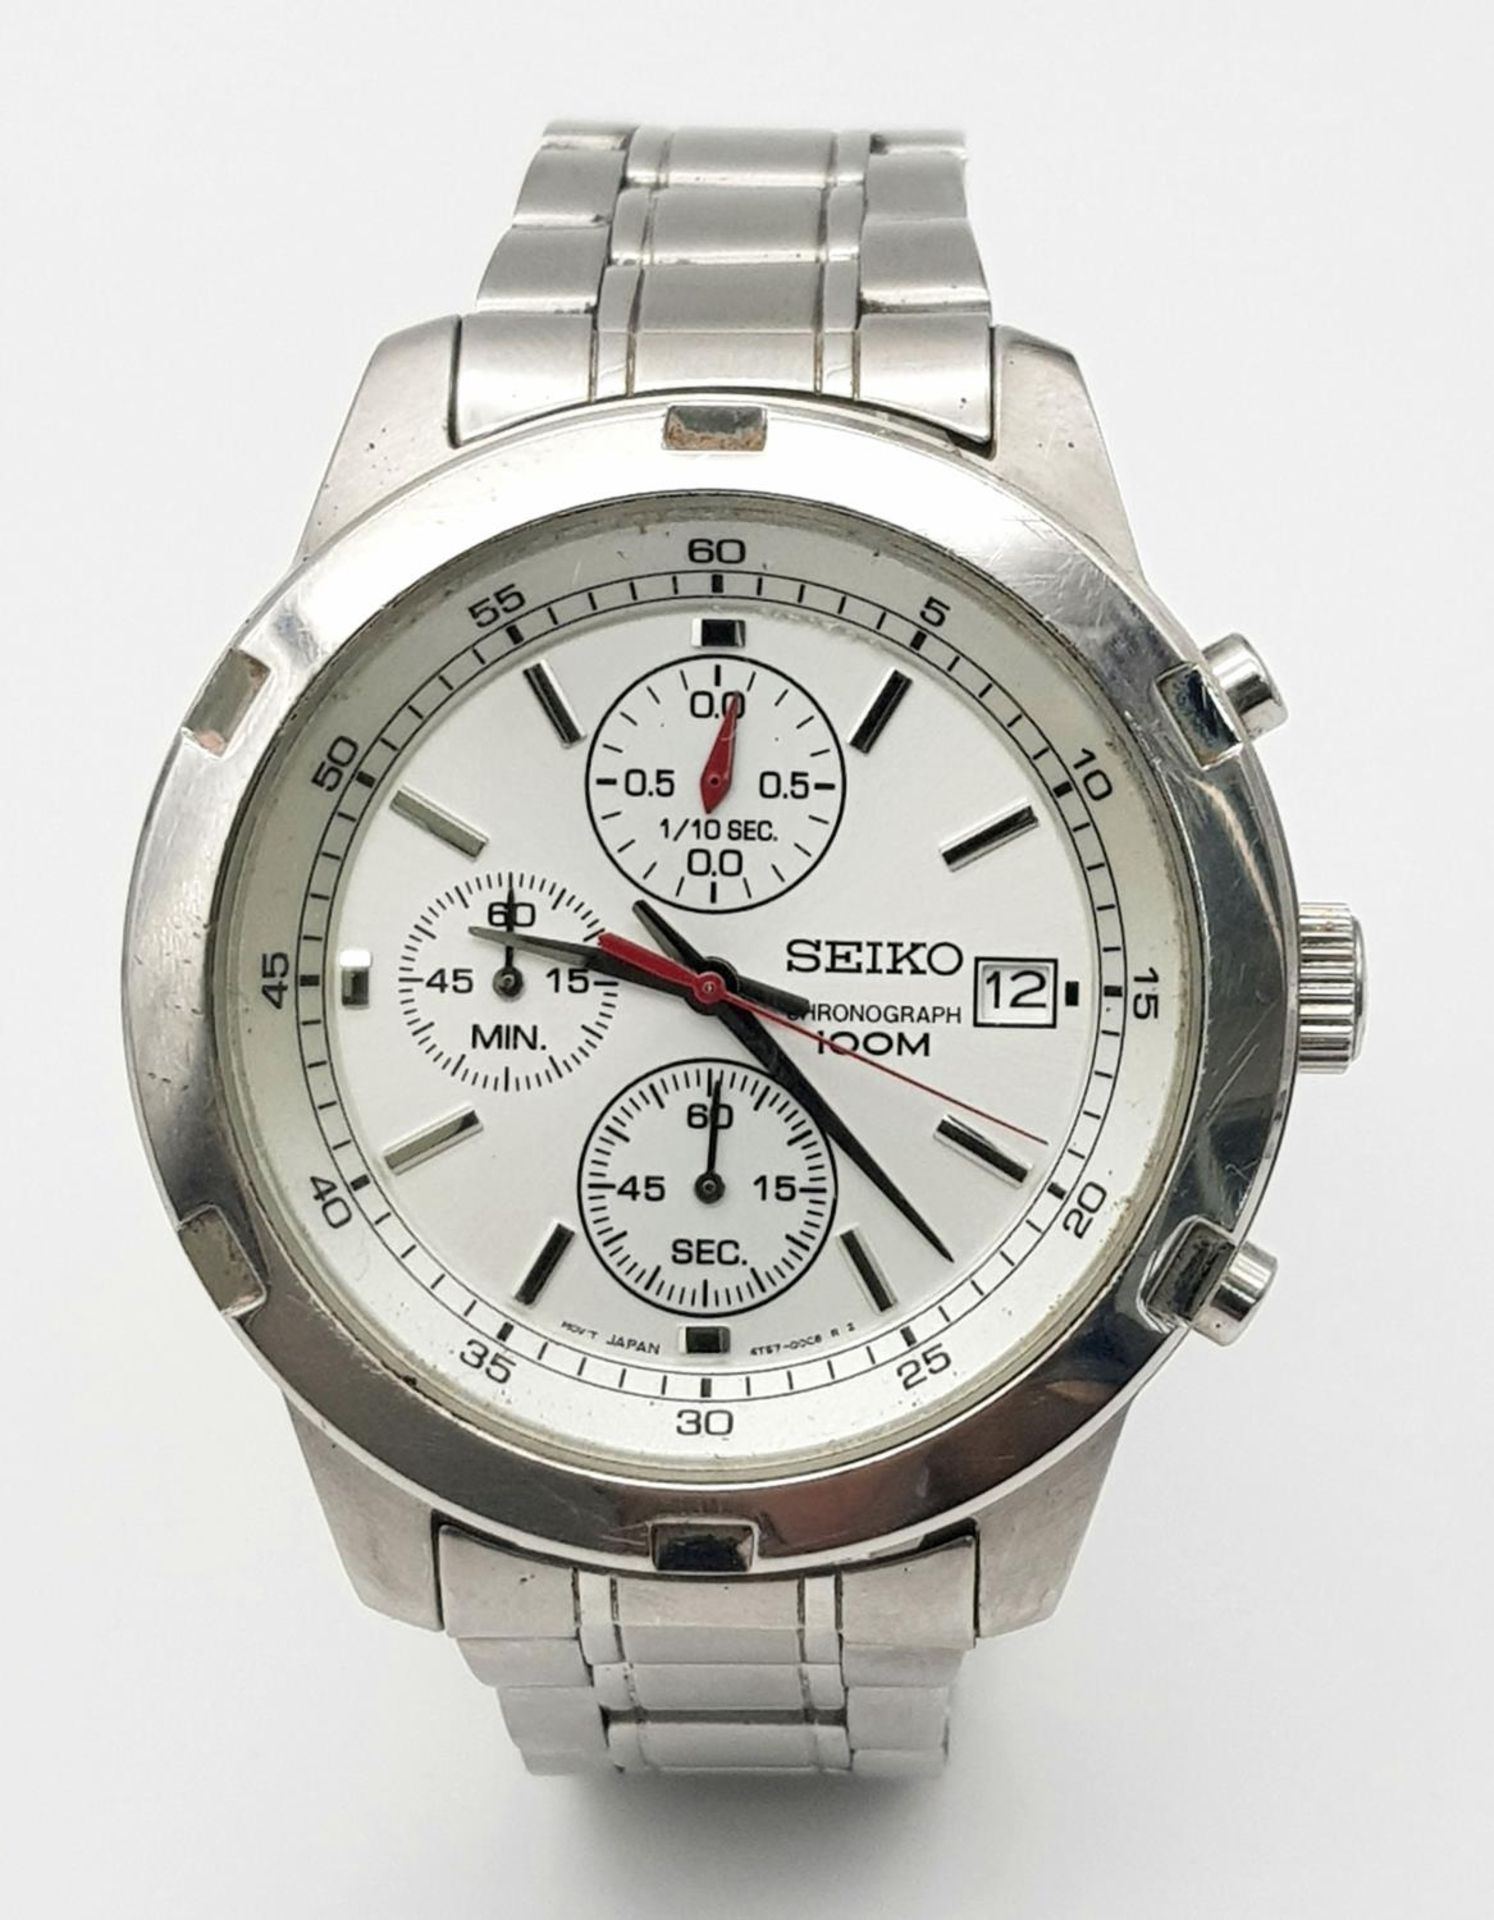 A Seiko 5 Chronograph Quartz Gents Watch. Stainless steel bracelet and case - 43mm. White dial - Image 2 of 6